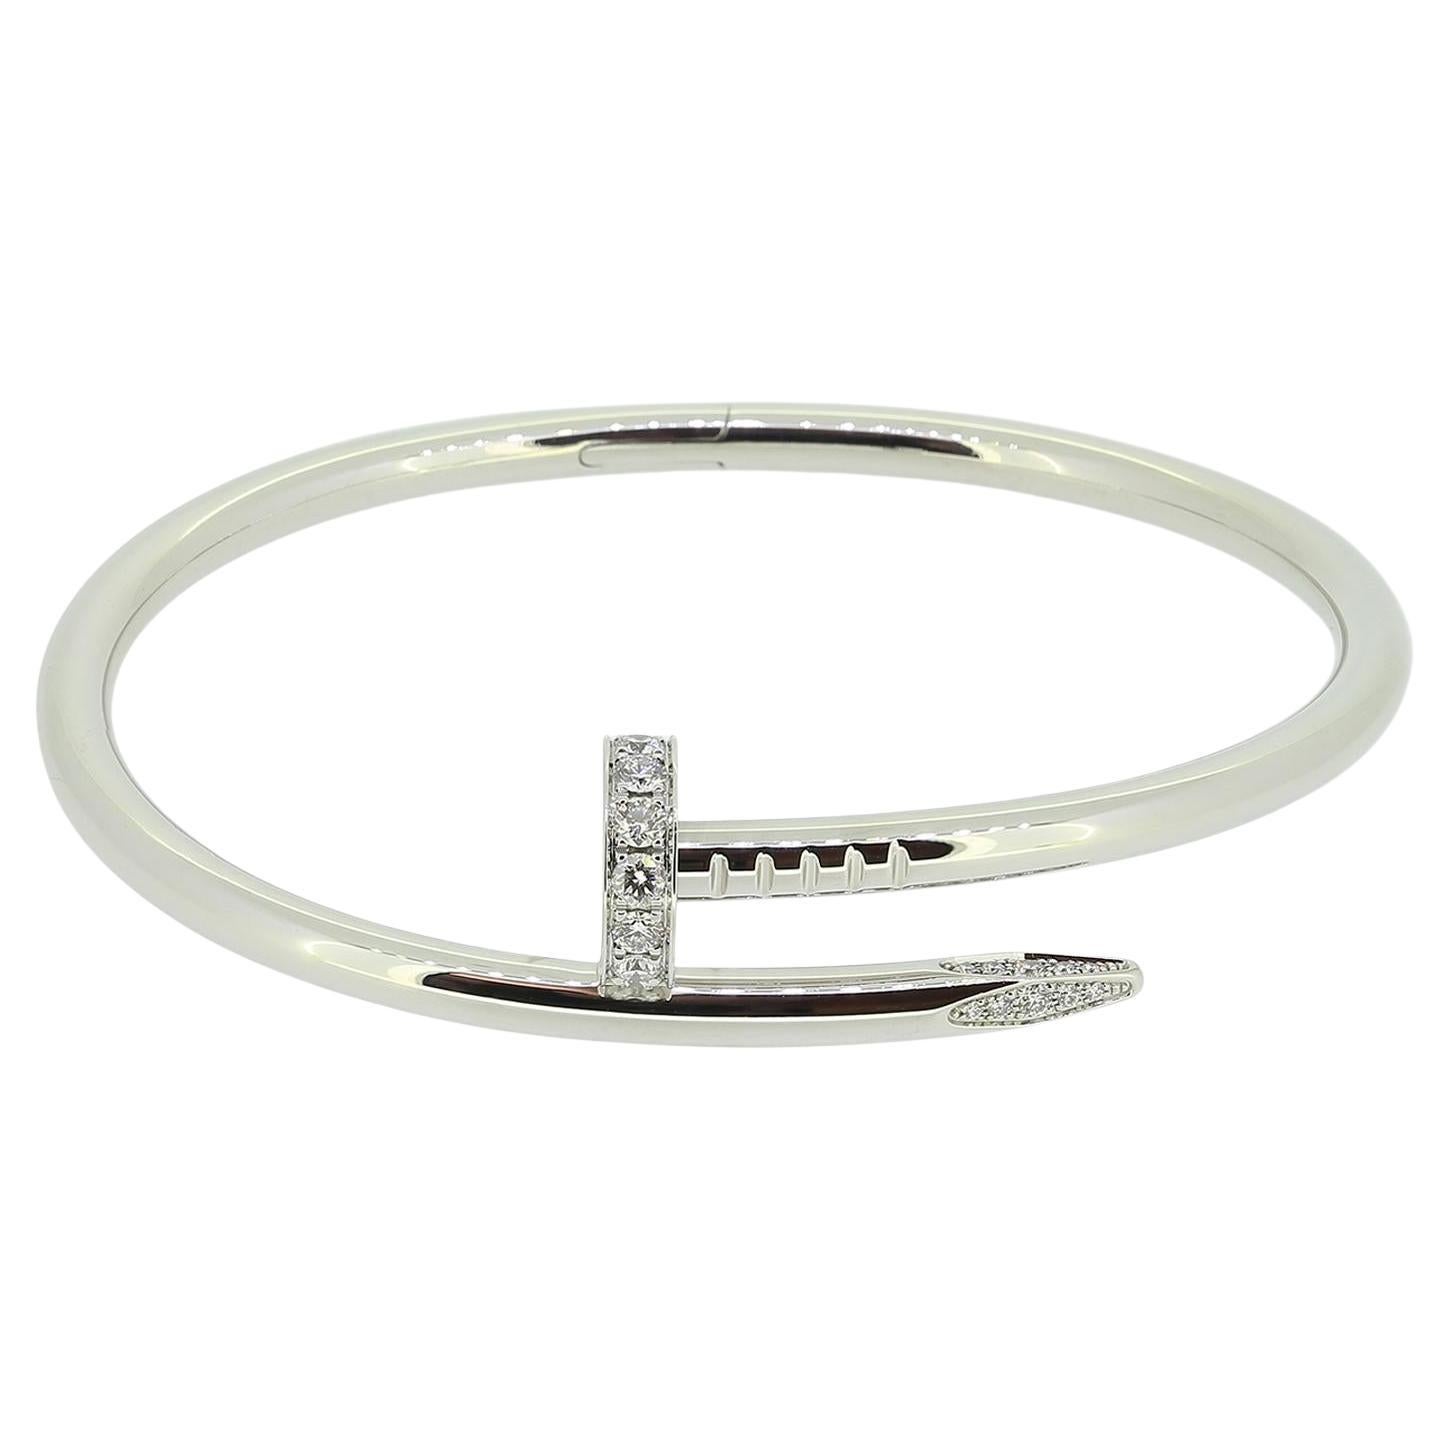 What is the Cartier nail bracelet called?